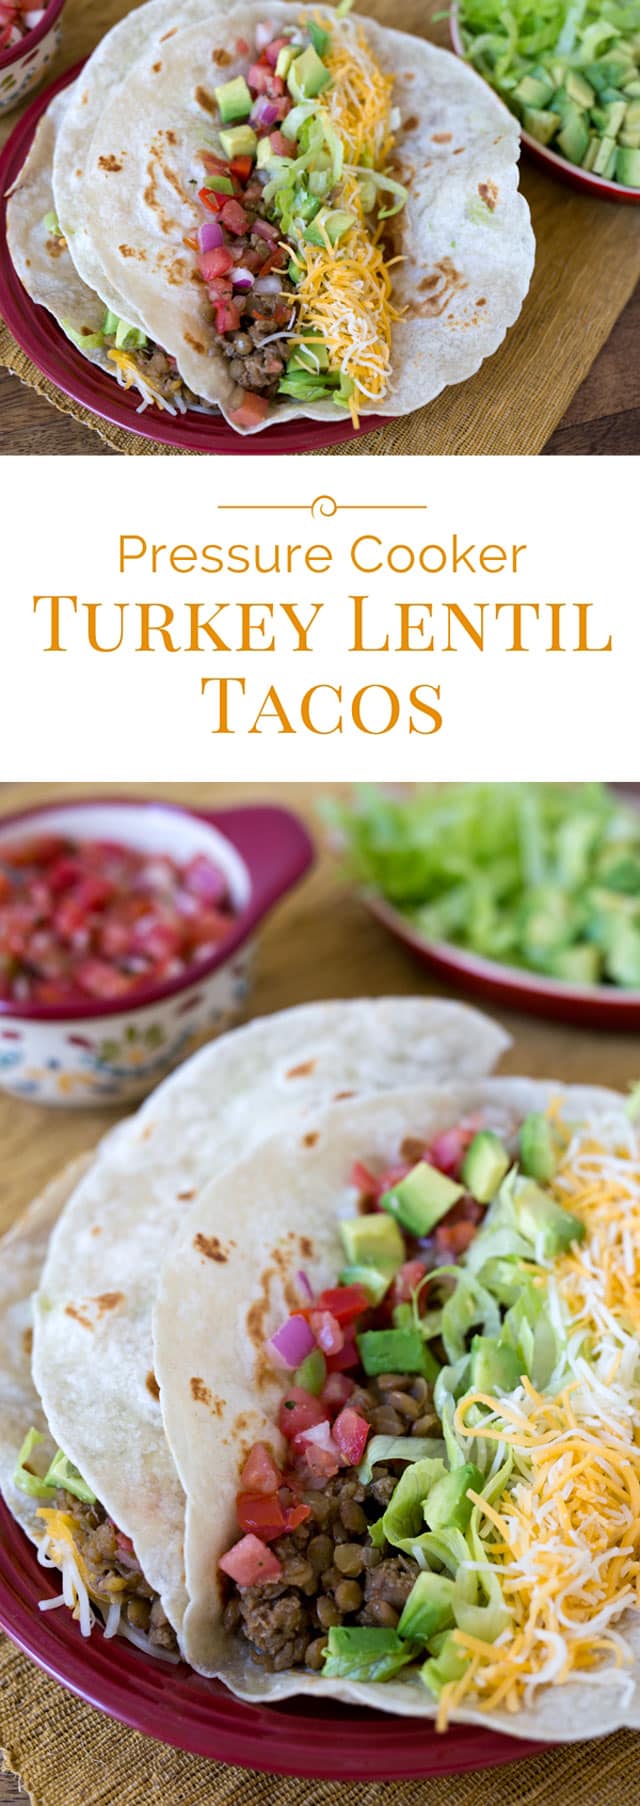 Taco filling made with lentils, lean ground turkey, onions, garlic, and a blend of Mexican spices. Makes a big batch in your Insta Pot. This Instant Pot recipe for Pressure Cooker Turkey Lentil Taco Filling is the perfect dinner solution for Taco Tuesday. A freezer friendly recipe! #instantpot #pressurecooking #tacos #freezerfriendly #mealprep via @PressureCook2da